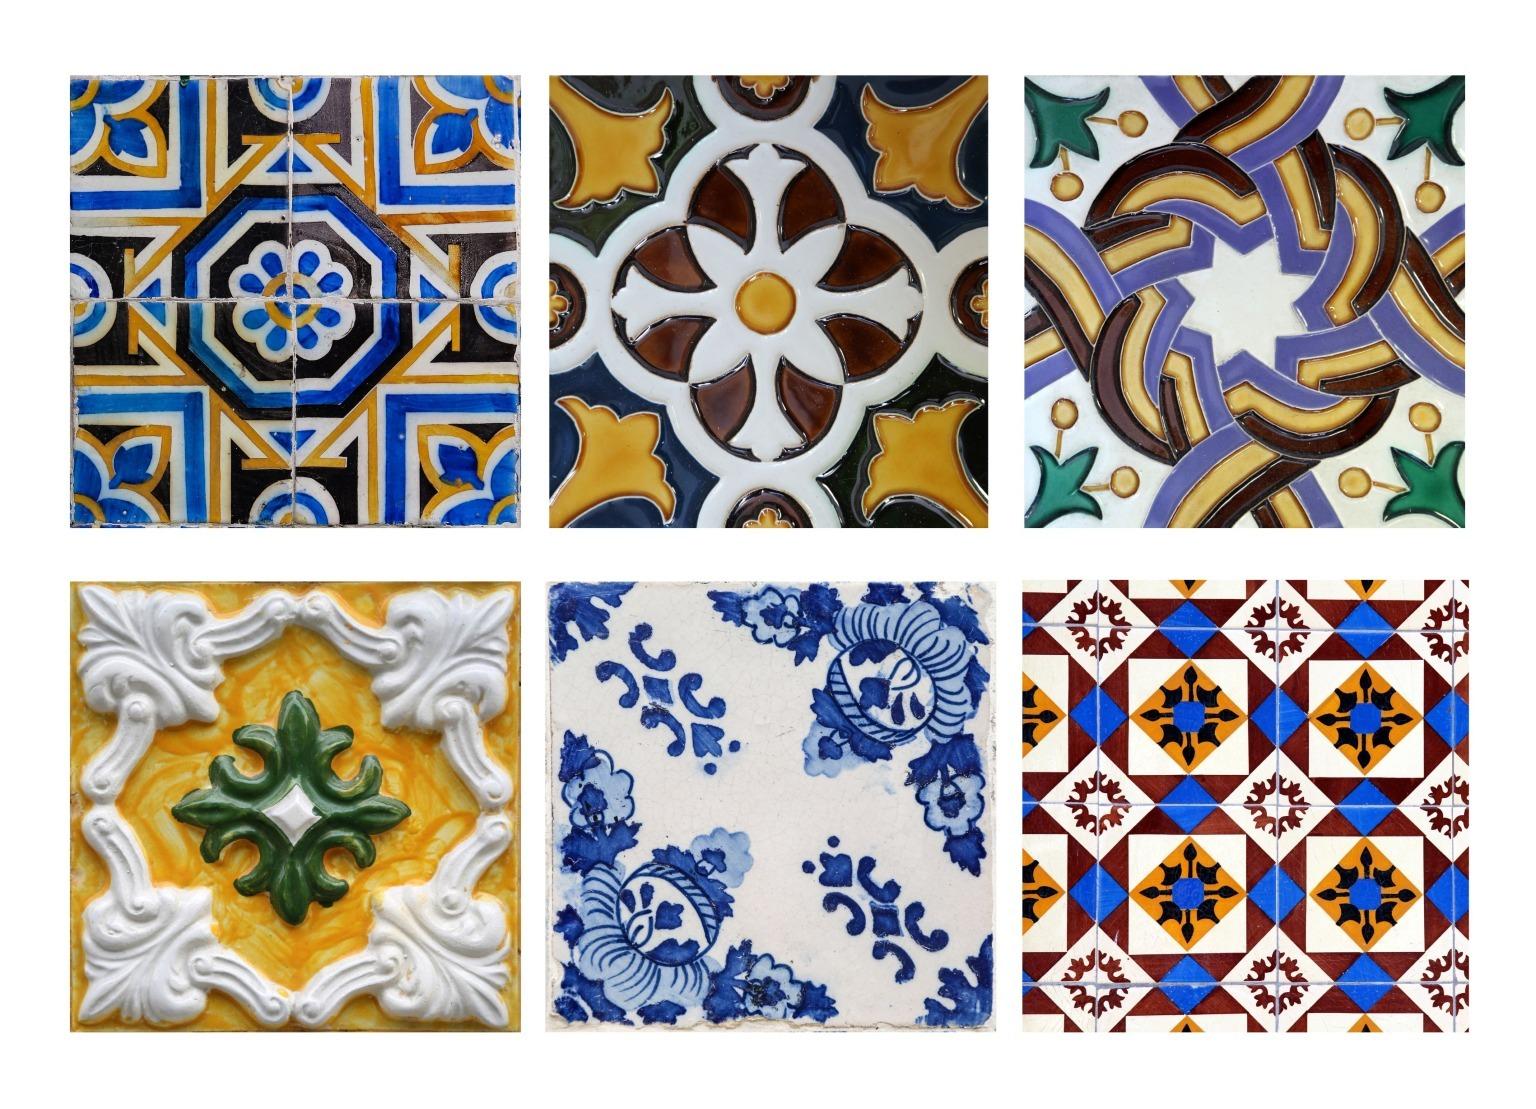 A colorful array of Portuguese Azulejos, showcasing intricate designs and cultural heritage.